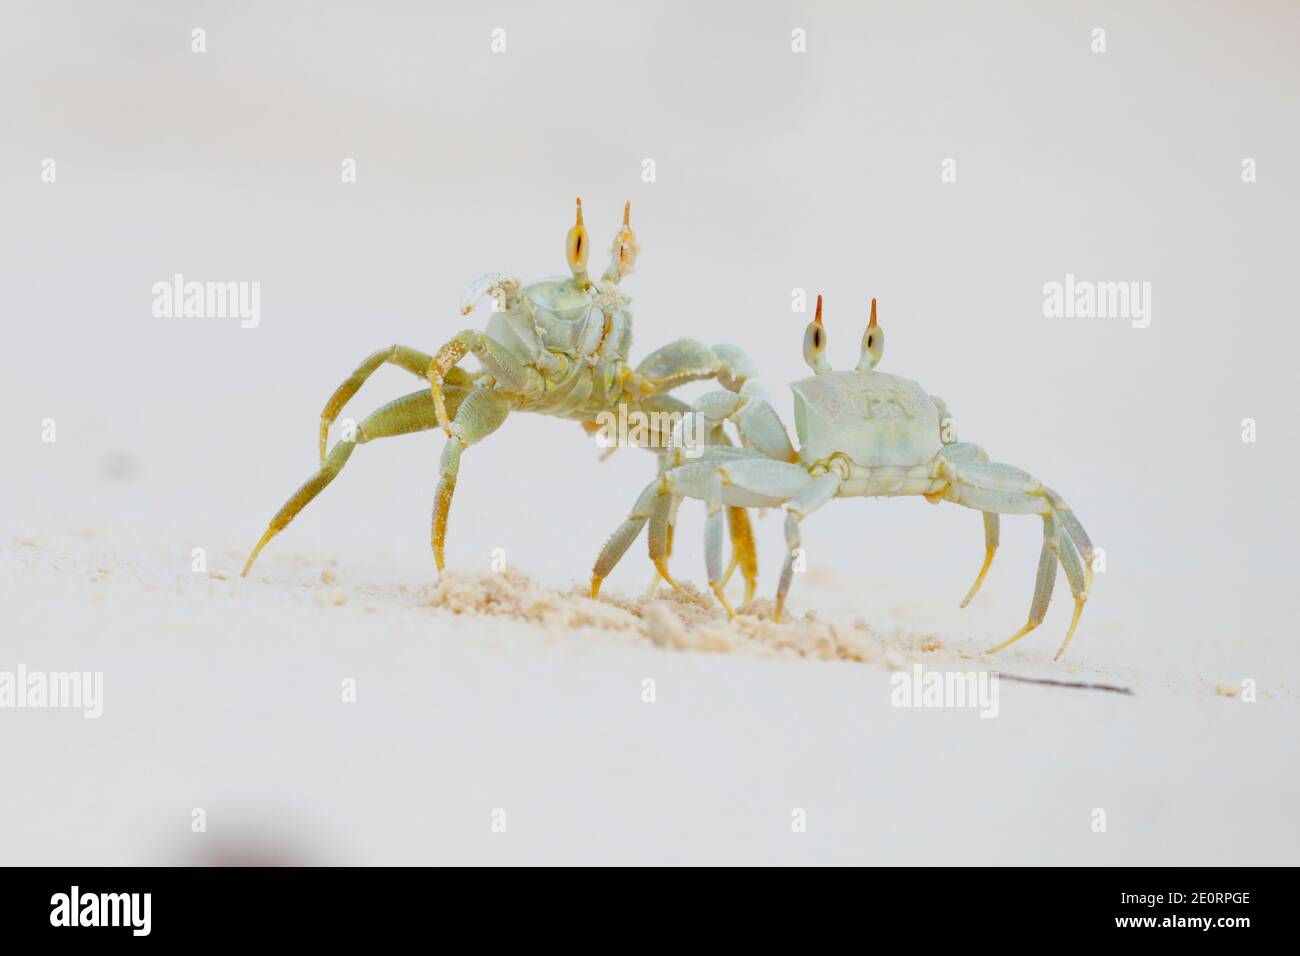 Two Horned Ghost Crabs or Horn-eyed Ghost Crabs (Ocypode ceratophthalmus) posturing and fighting after one stepped on the other's burrow, Seychelles Stock Photo